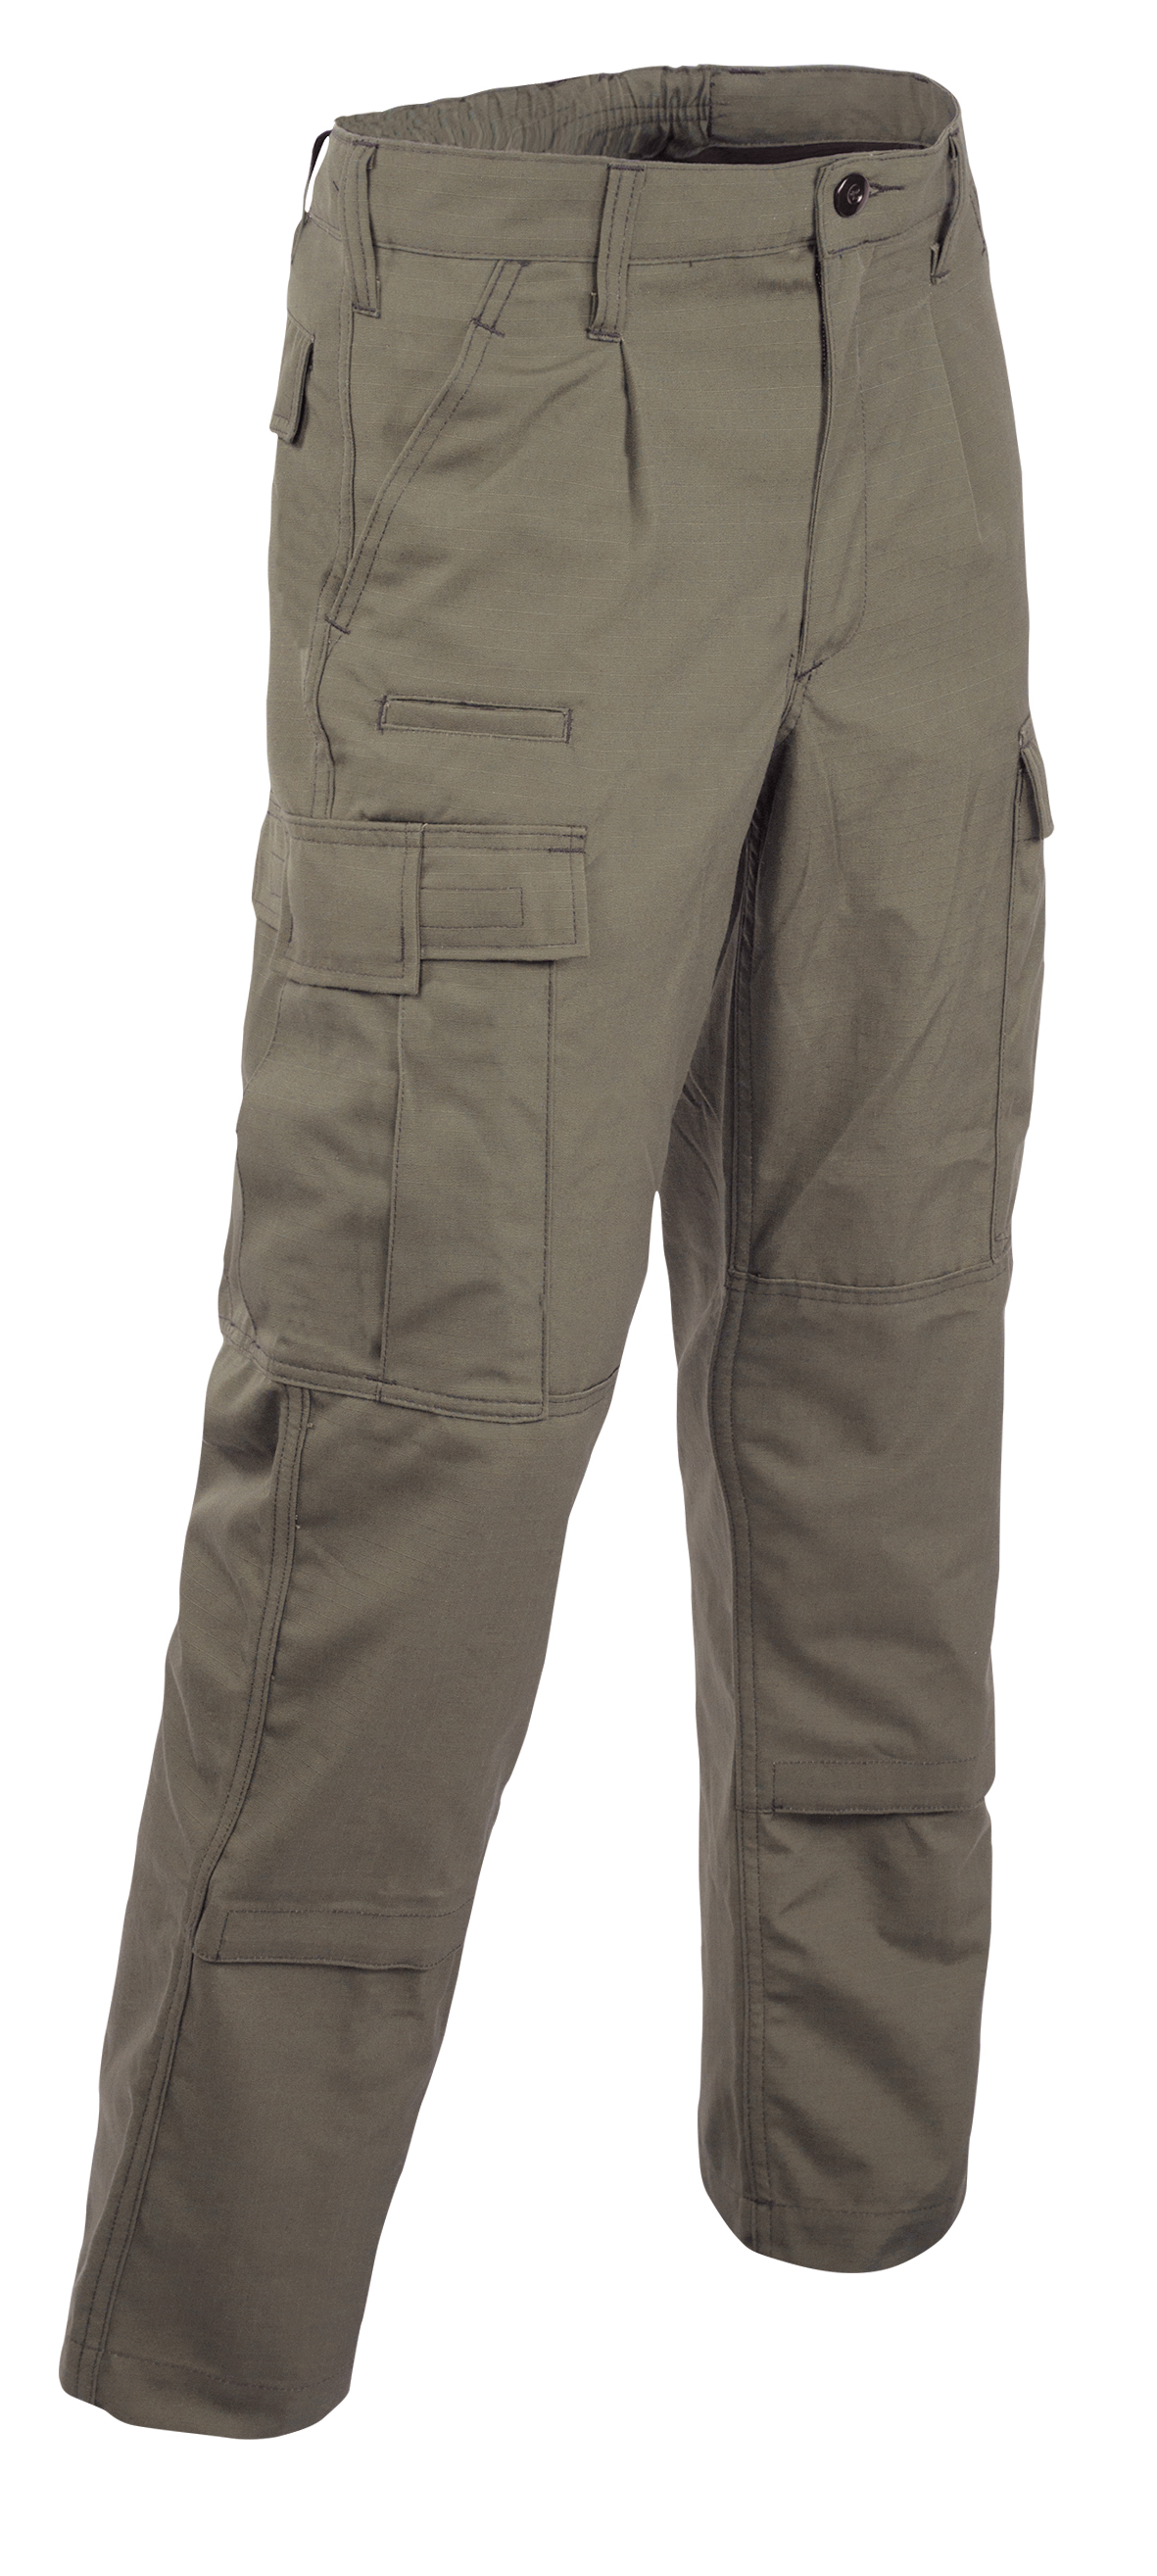 Tactical Köhler trousers | Recon Company